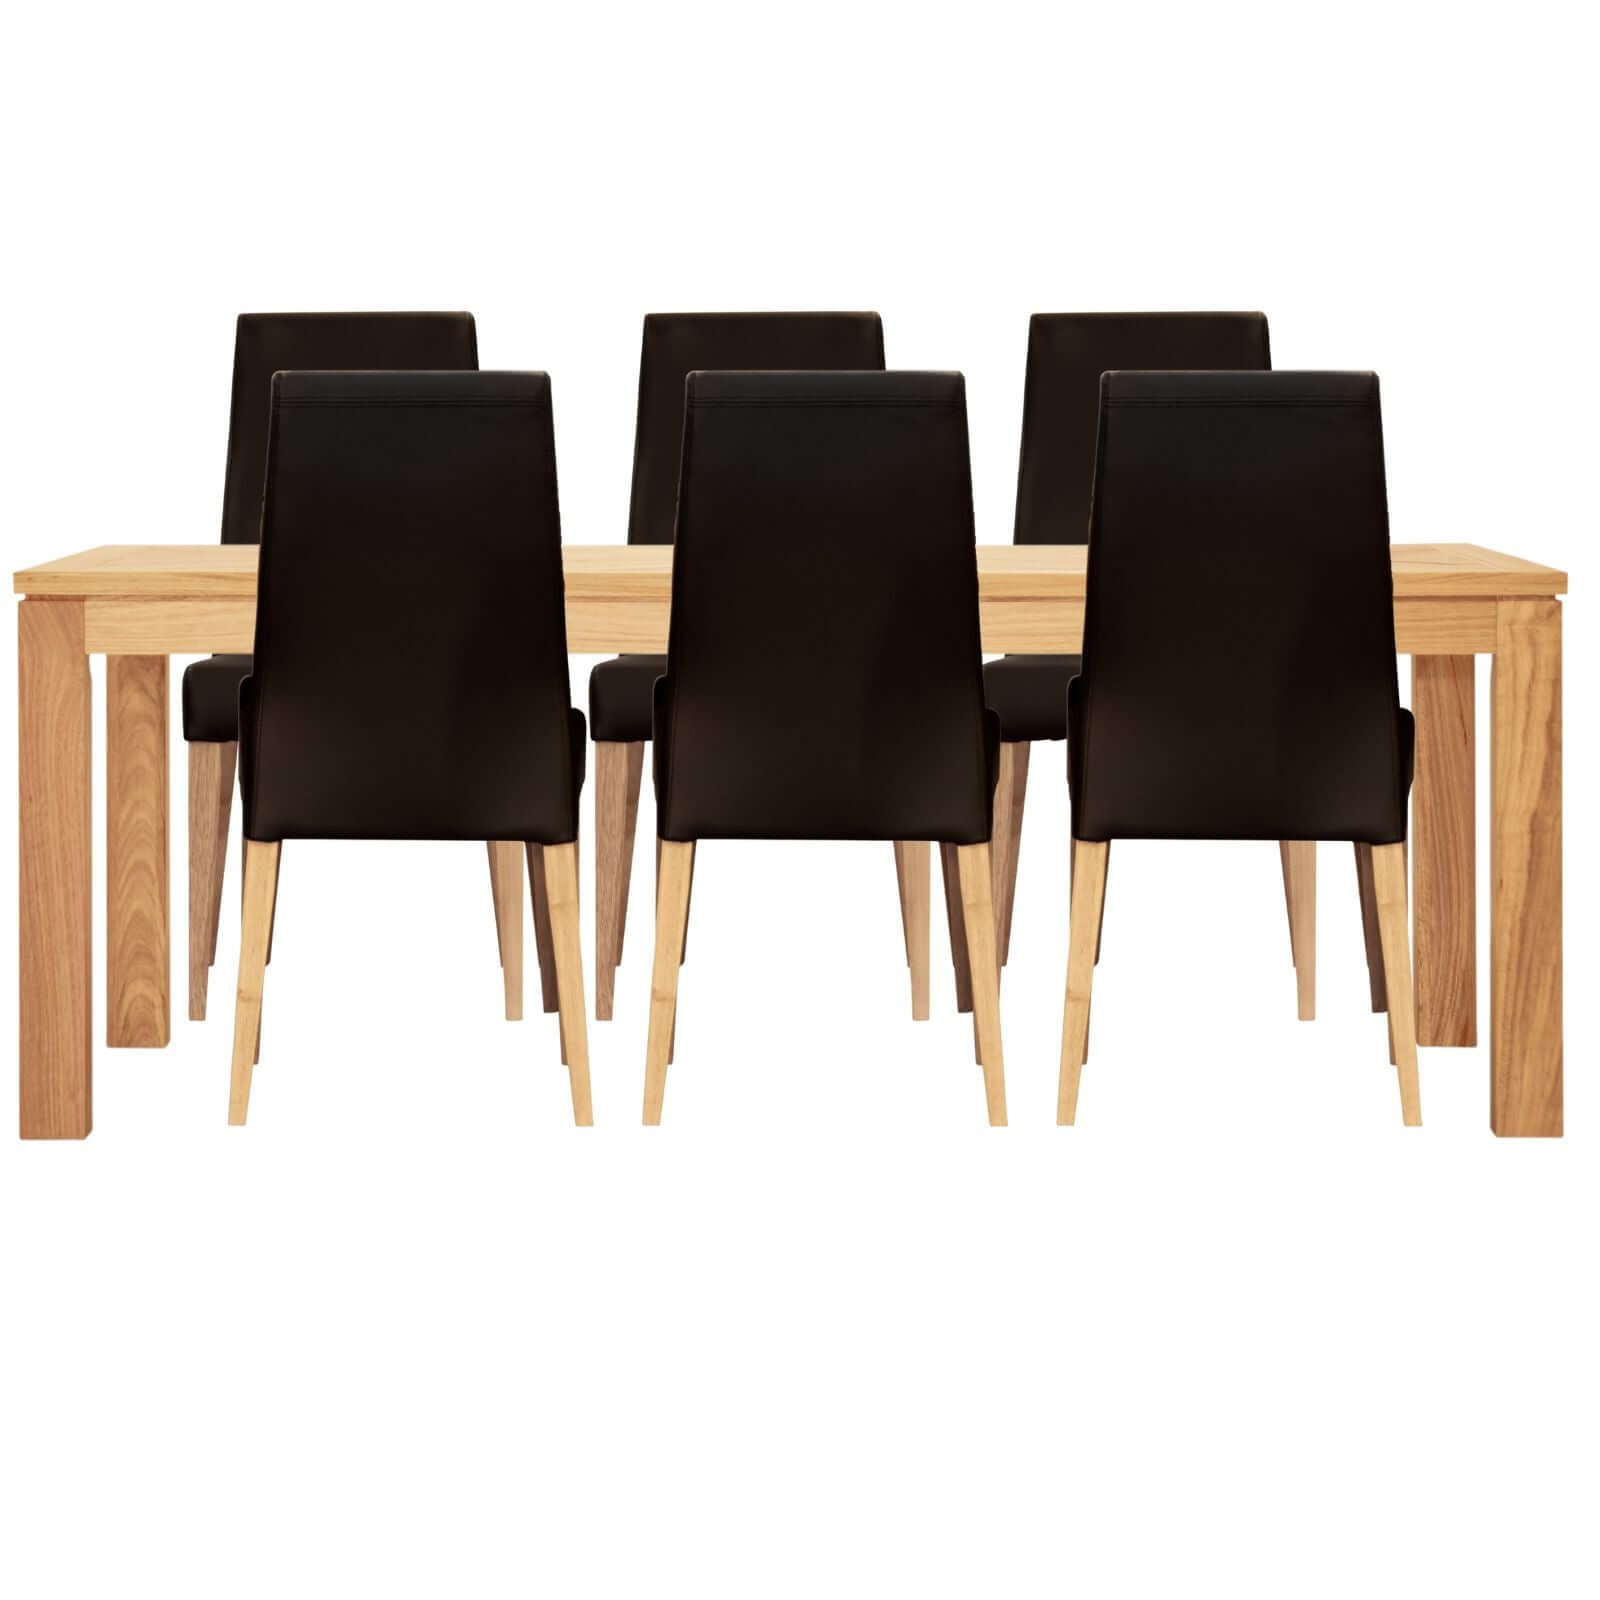 Rosemallow 7pc Dining Set 180cm Table 6 Black PU Chair Solid Messmate Timber-Upinteriors